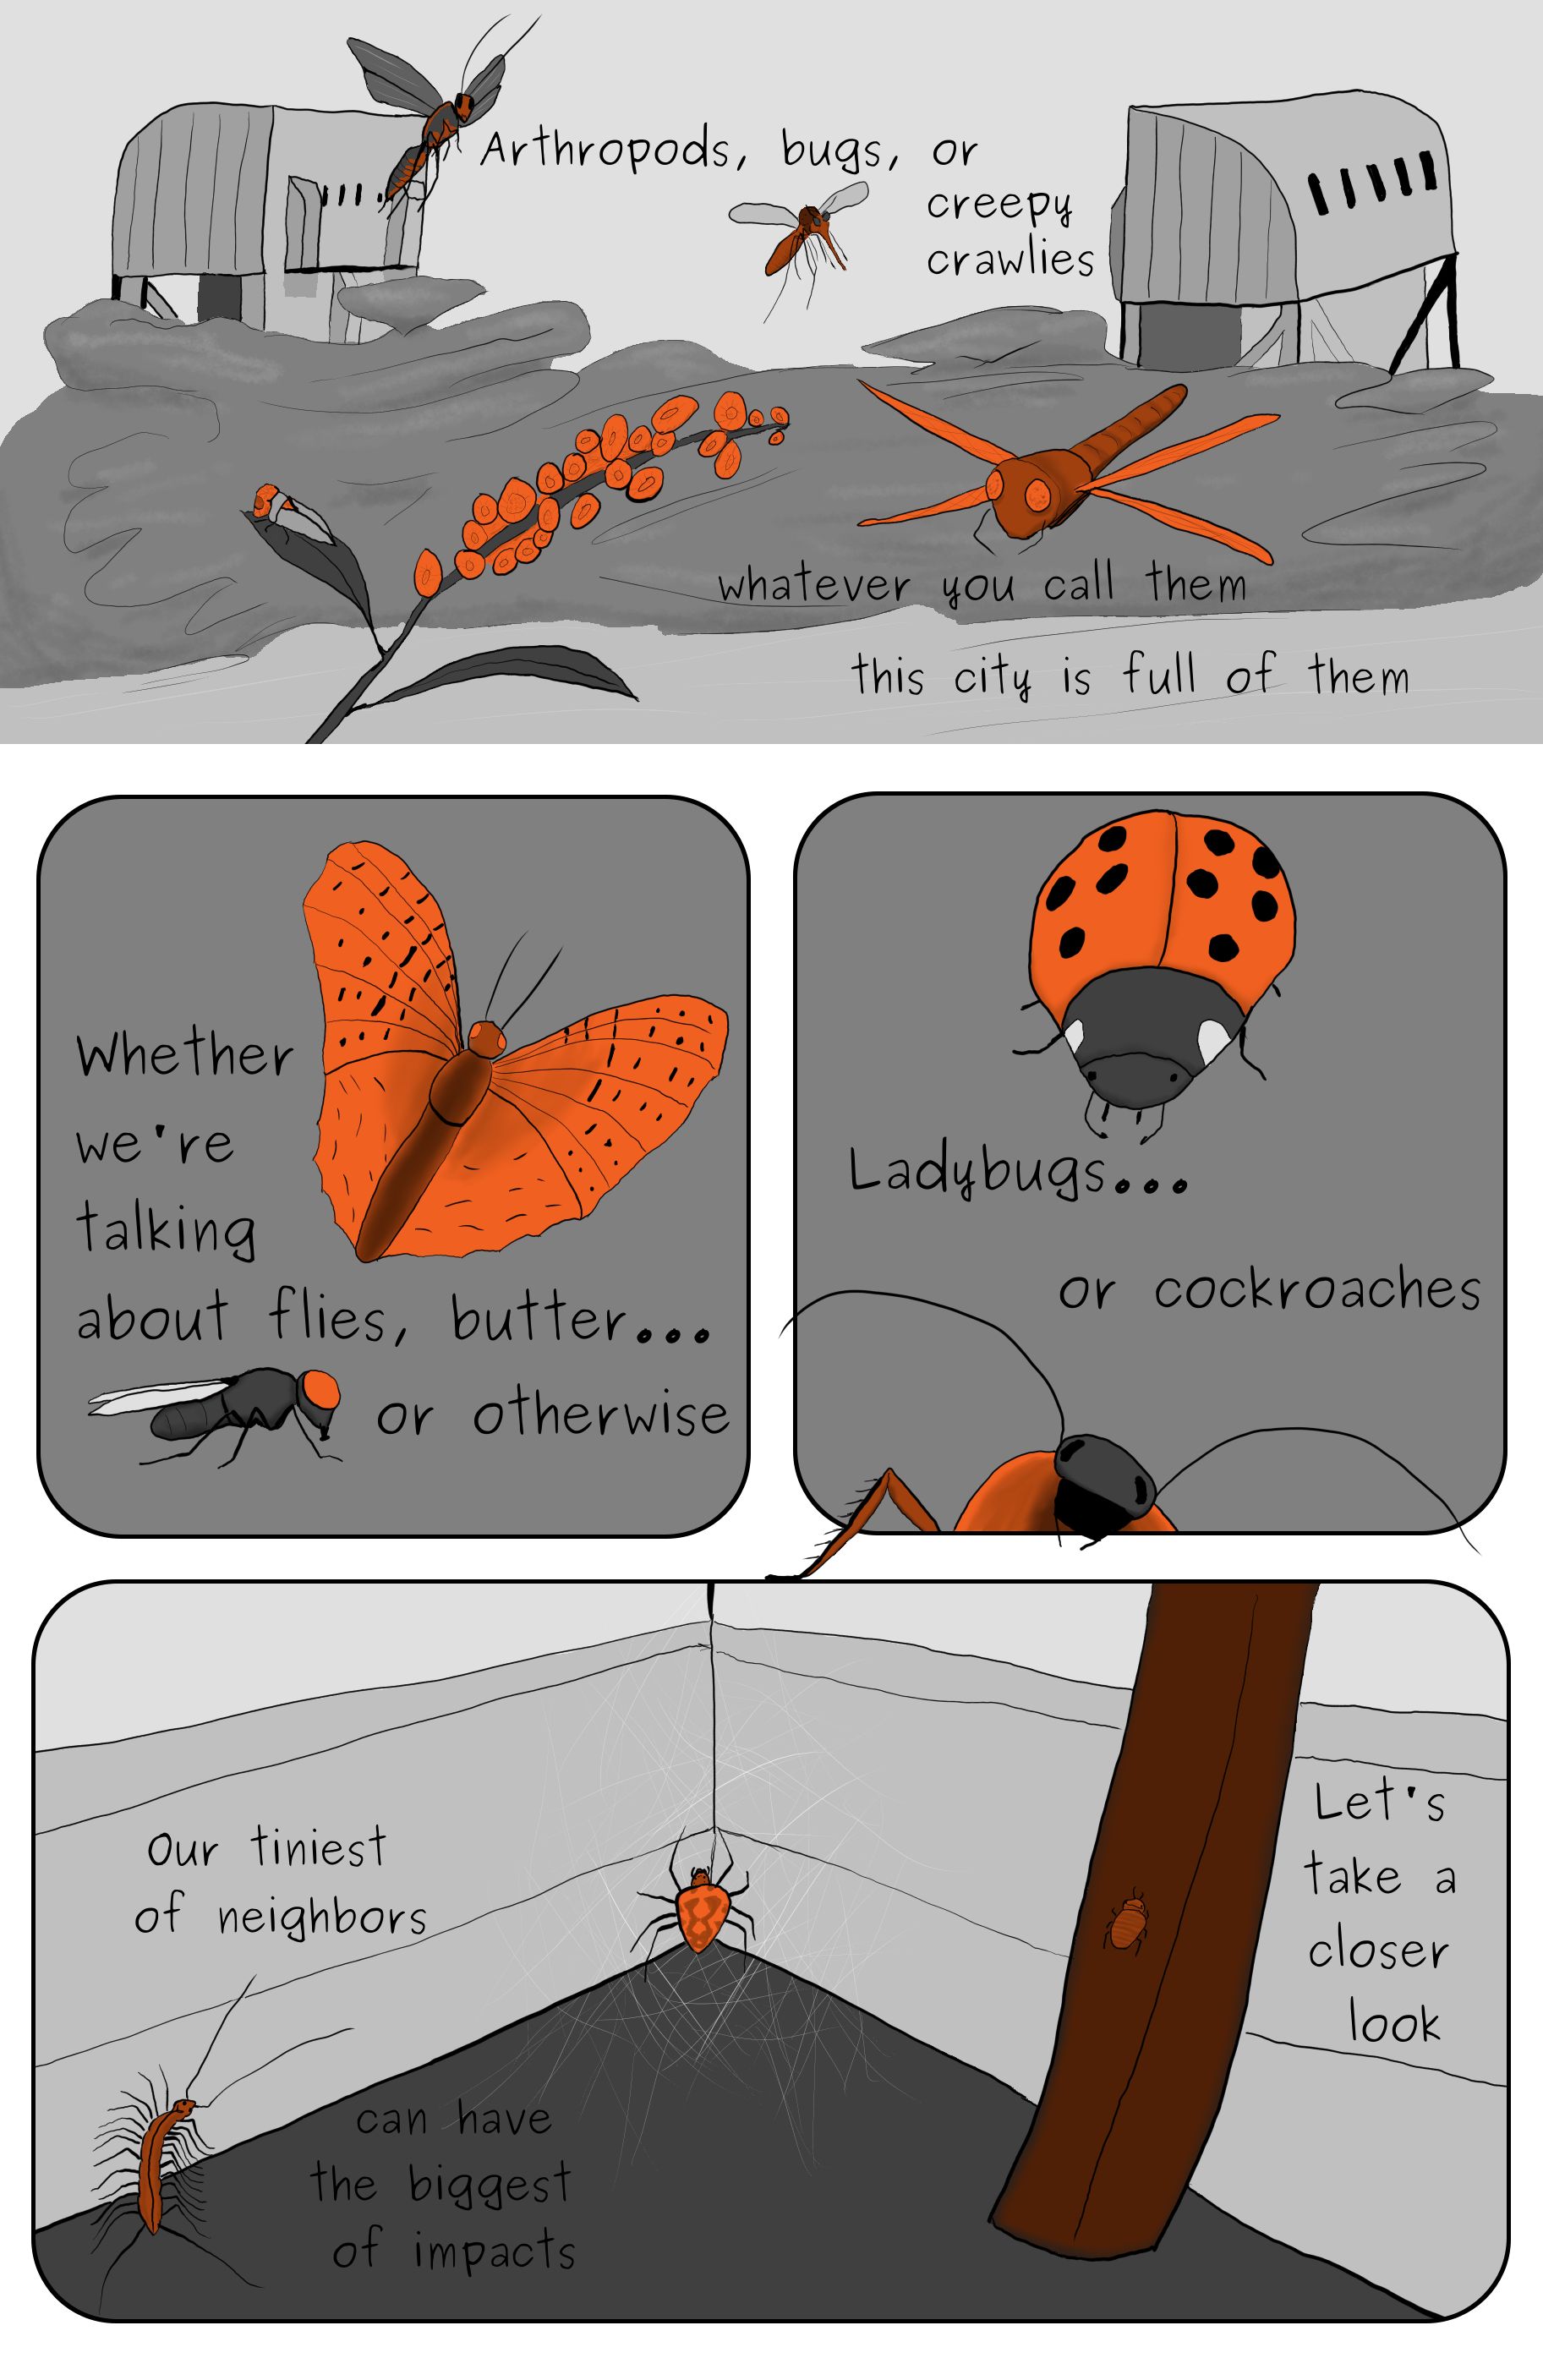 A five panel comic page feturing a bedbug, a marbled orb weaver, a house centipede, a cockroach, a ladybug, a housefly, a butterfly, a broad headed sharpshooter, a dragofly, a mosquito, and a wasp